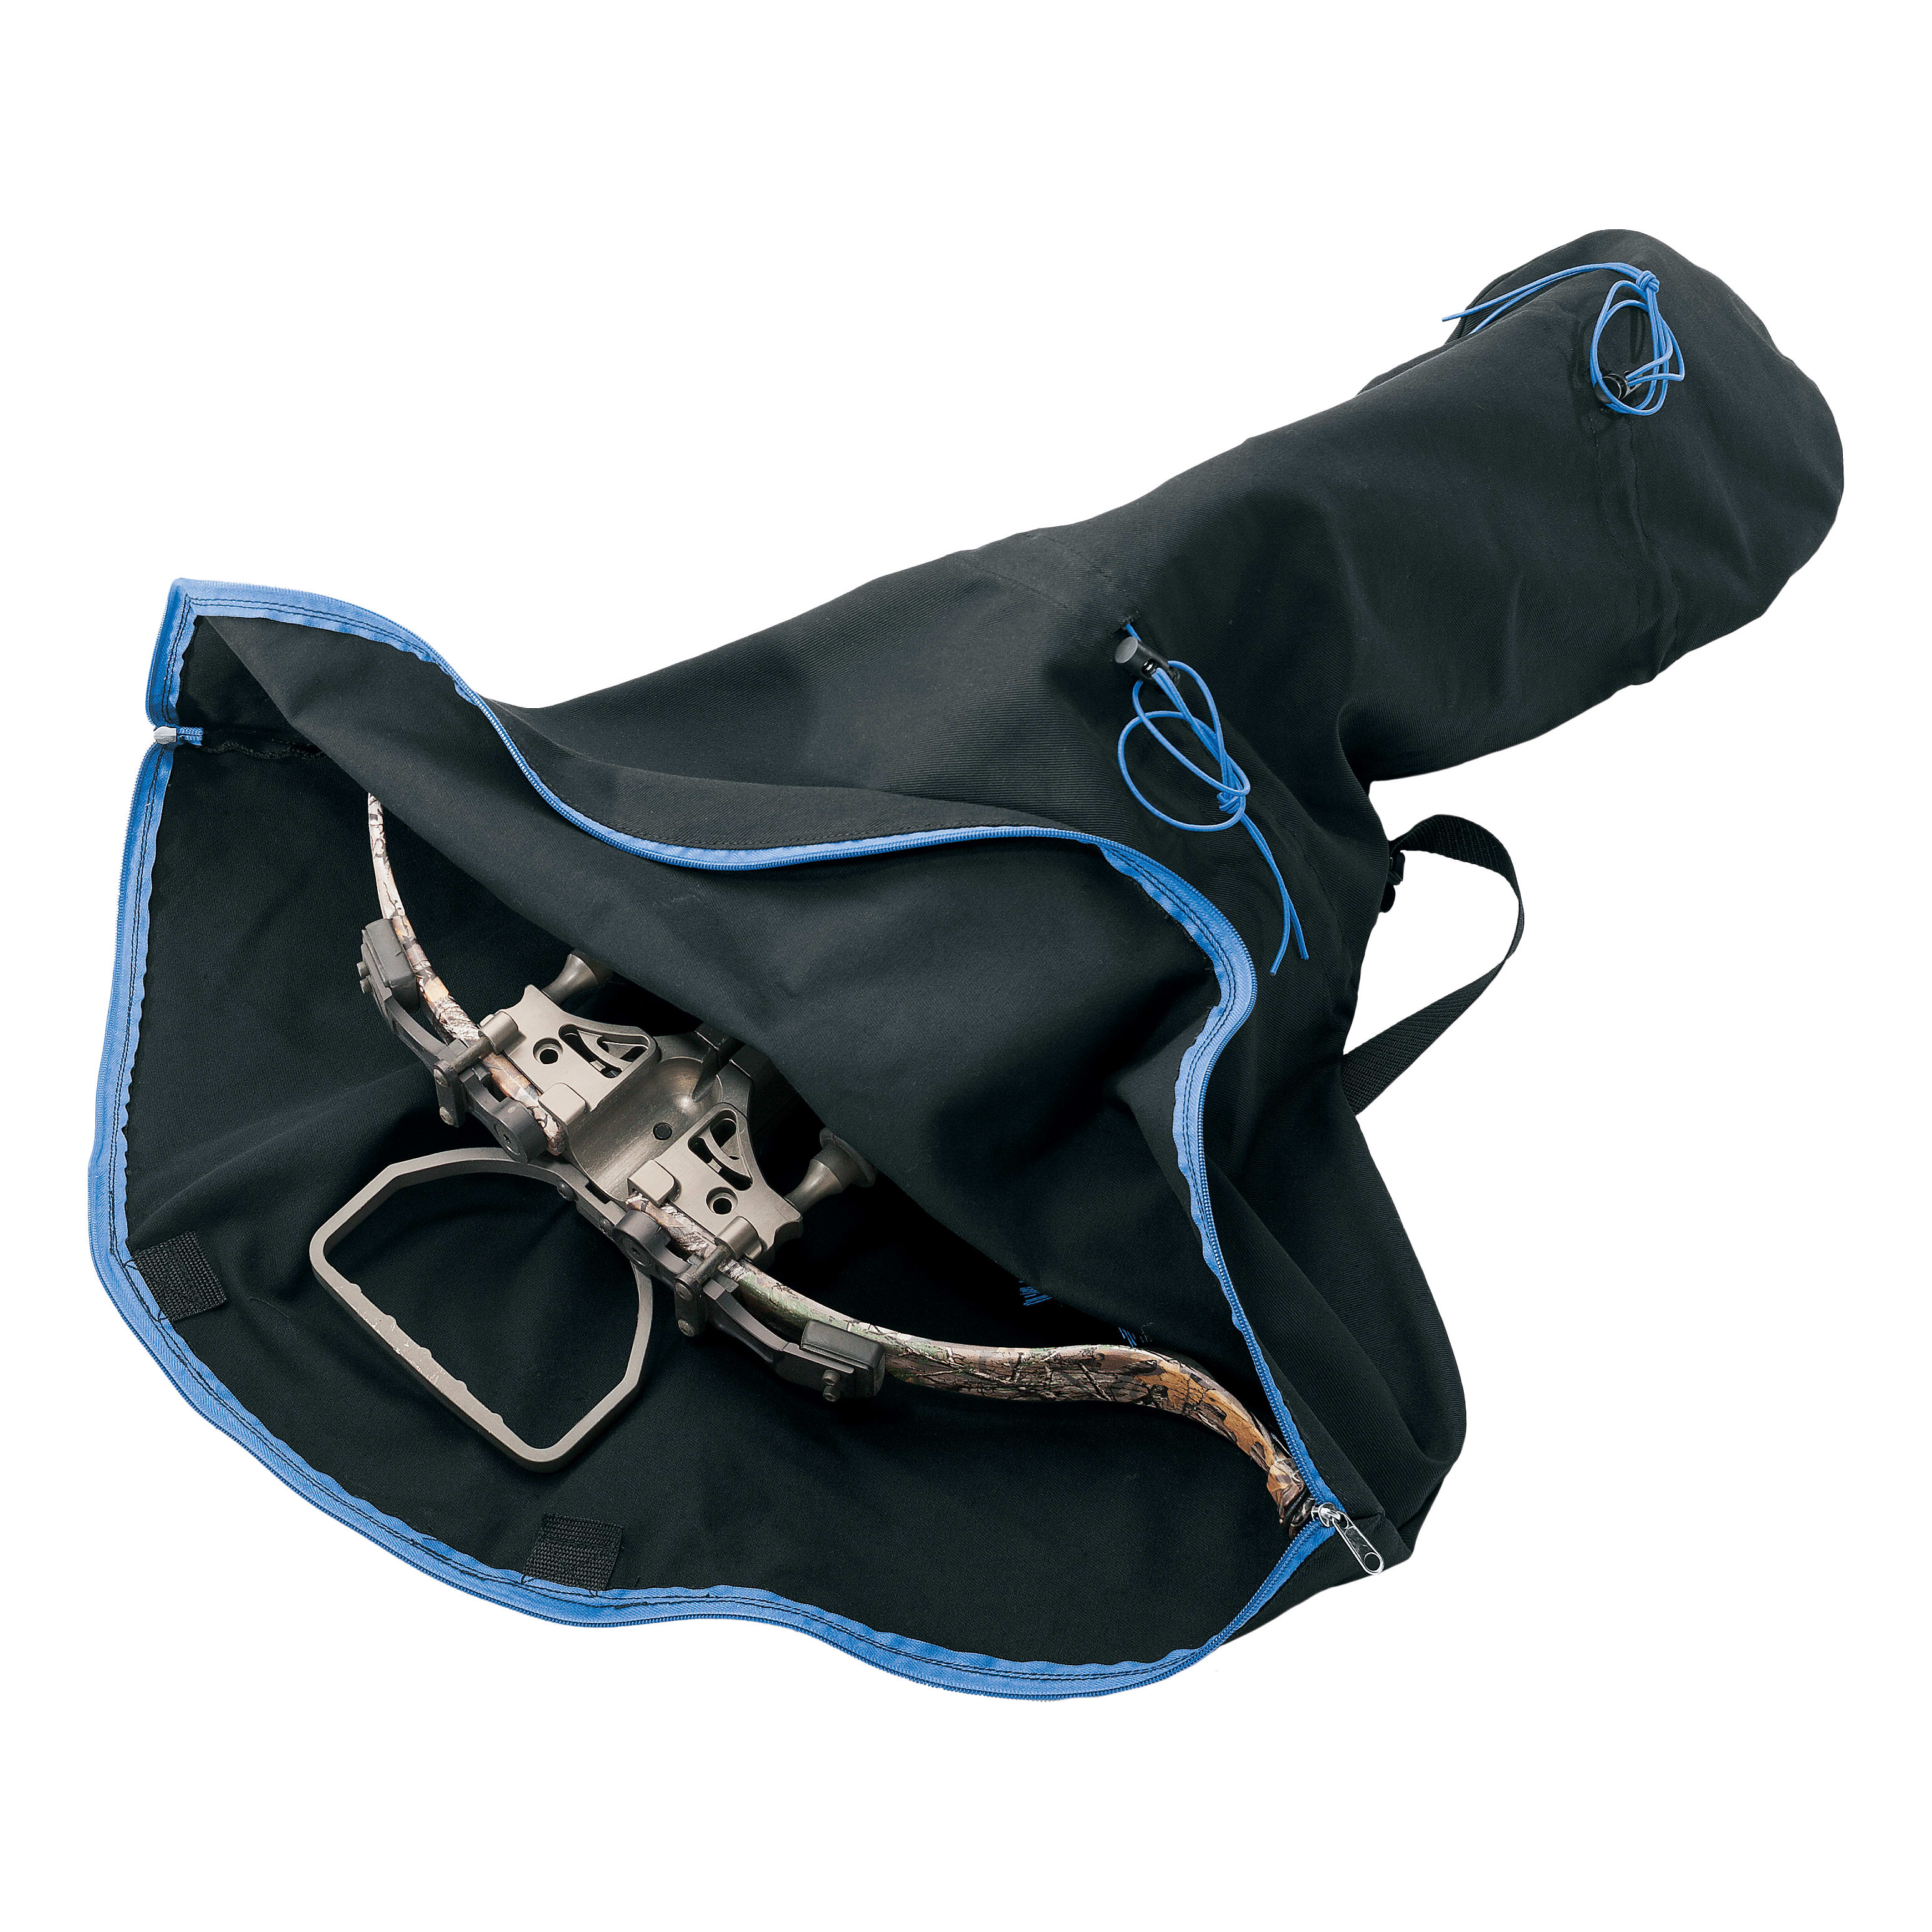 Excalibur Poncho Crossbow Case - Open View